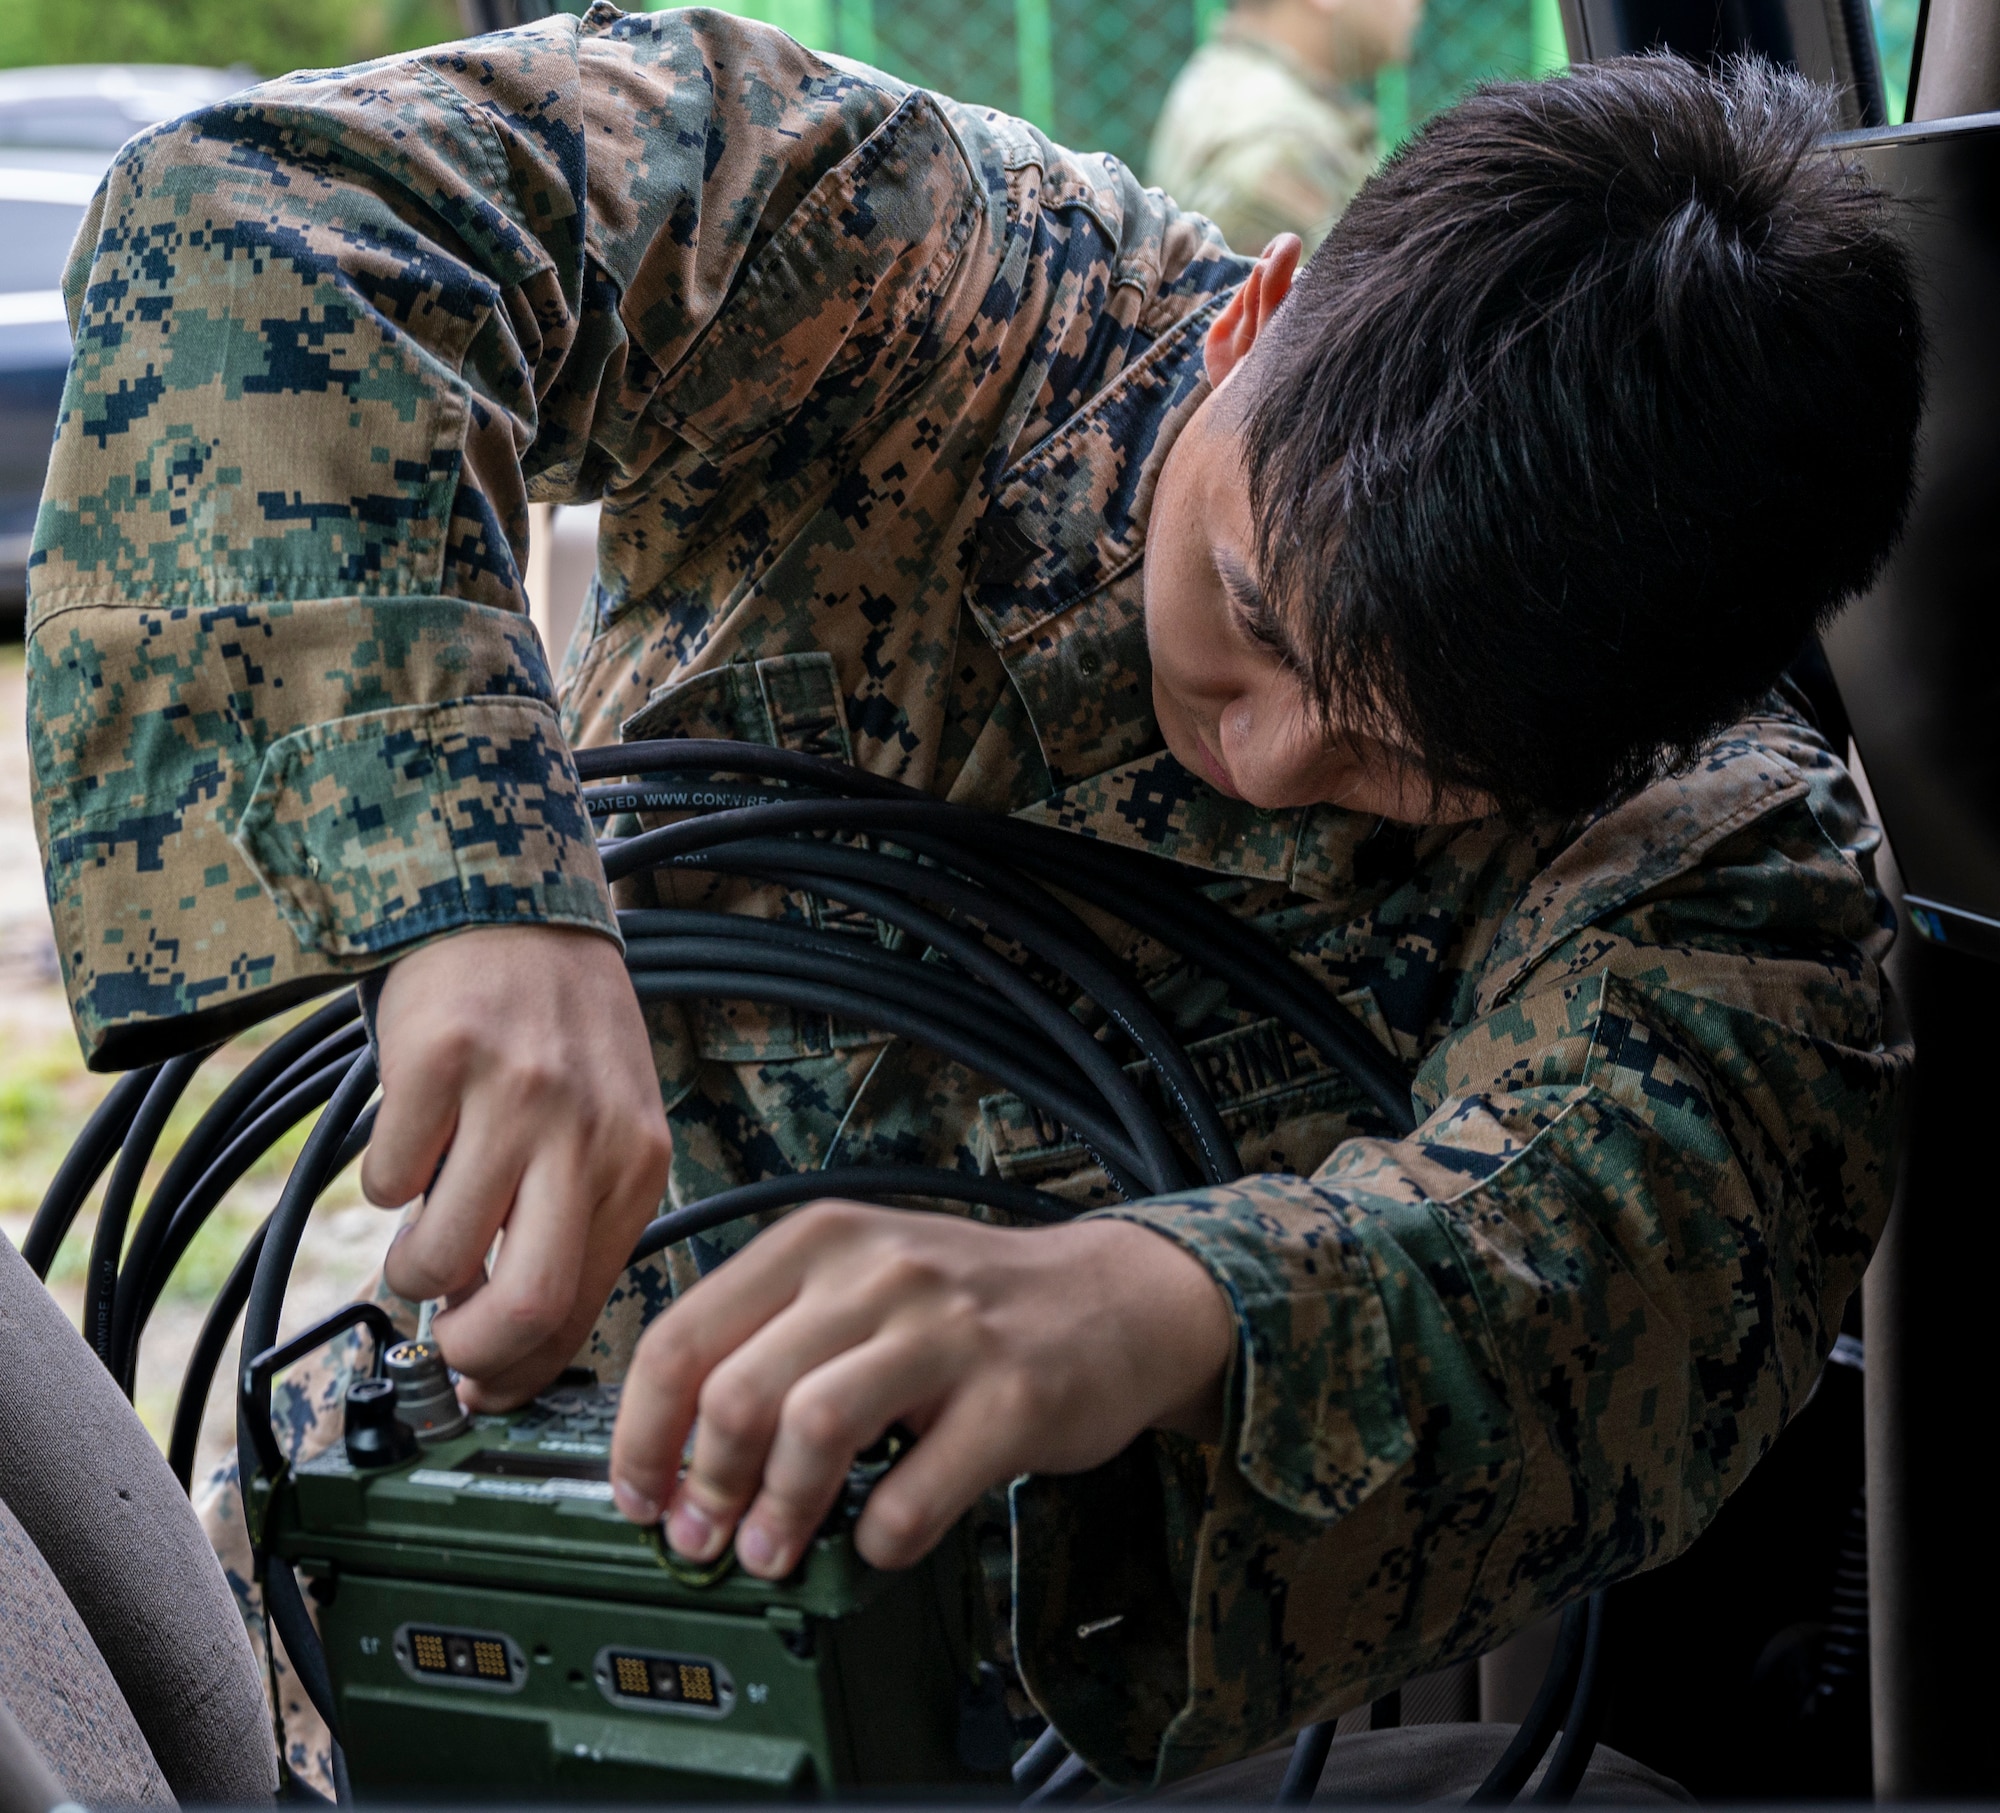 U.S Marine Corps. Sgt. Jaden Mensalvas, 621st Air Control Squadron intelligence analyst, installs an ultra high frequency radio in a mobile tactical command and control (C2) vehicle at Yongin Army Base, Republic of Korea, Aug. 31, 2022.